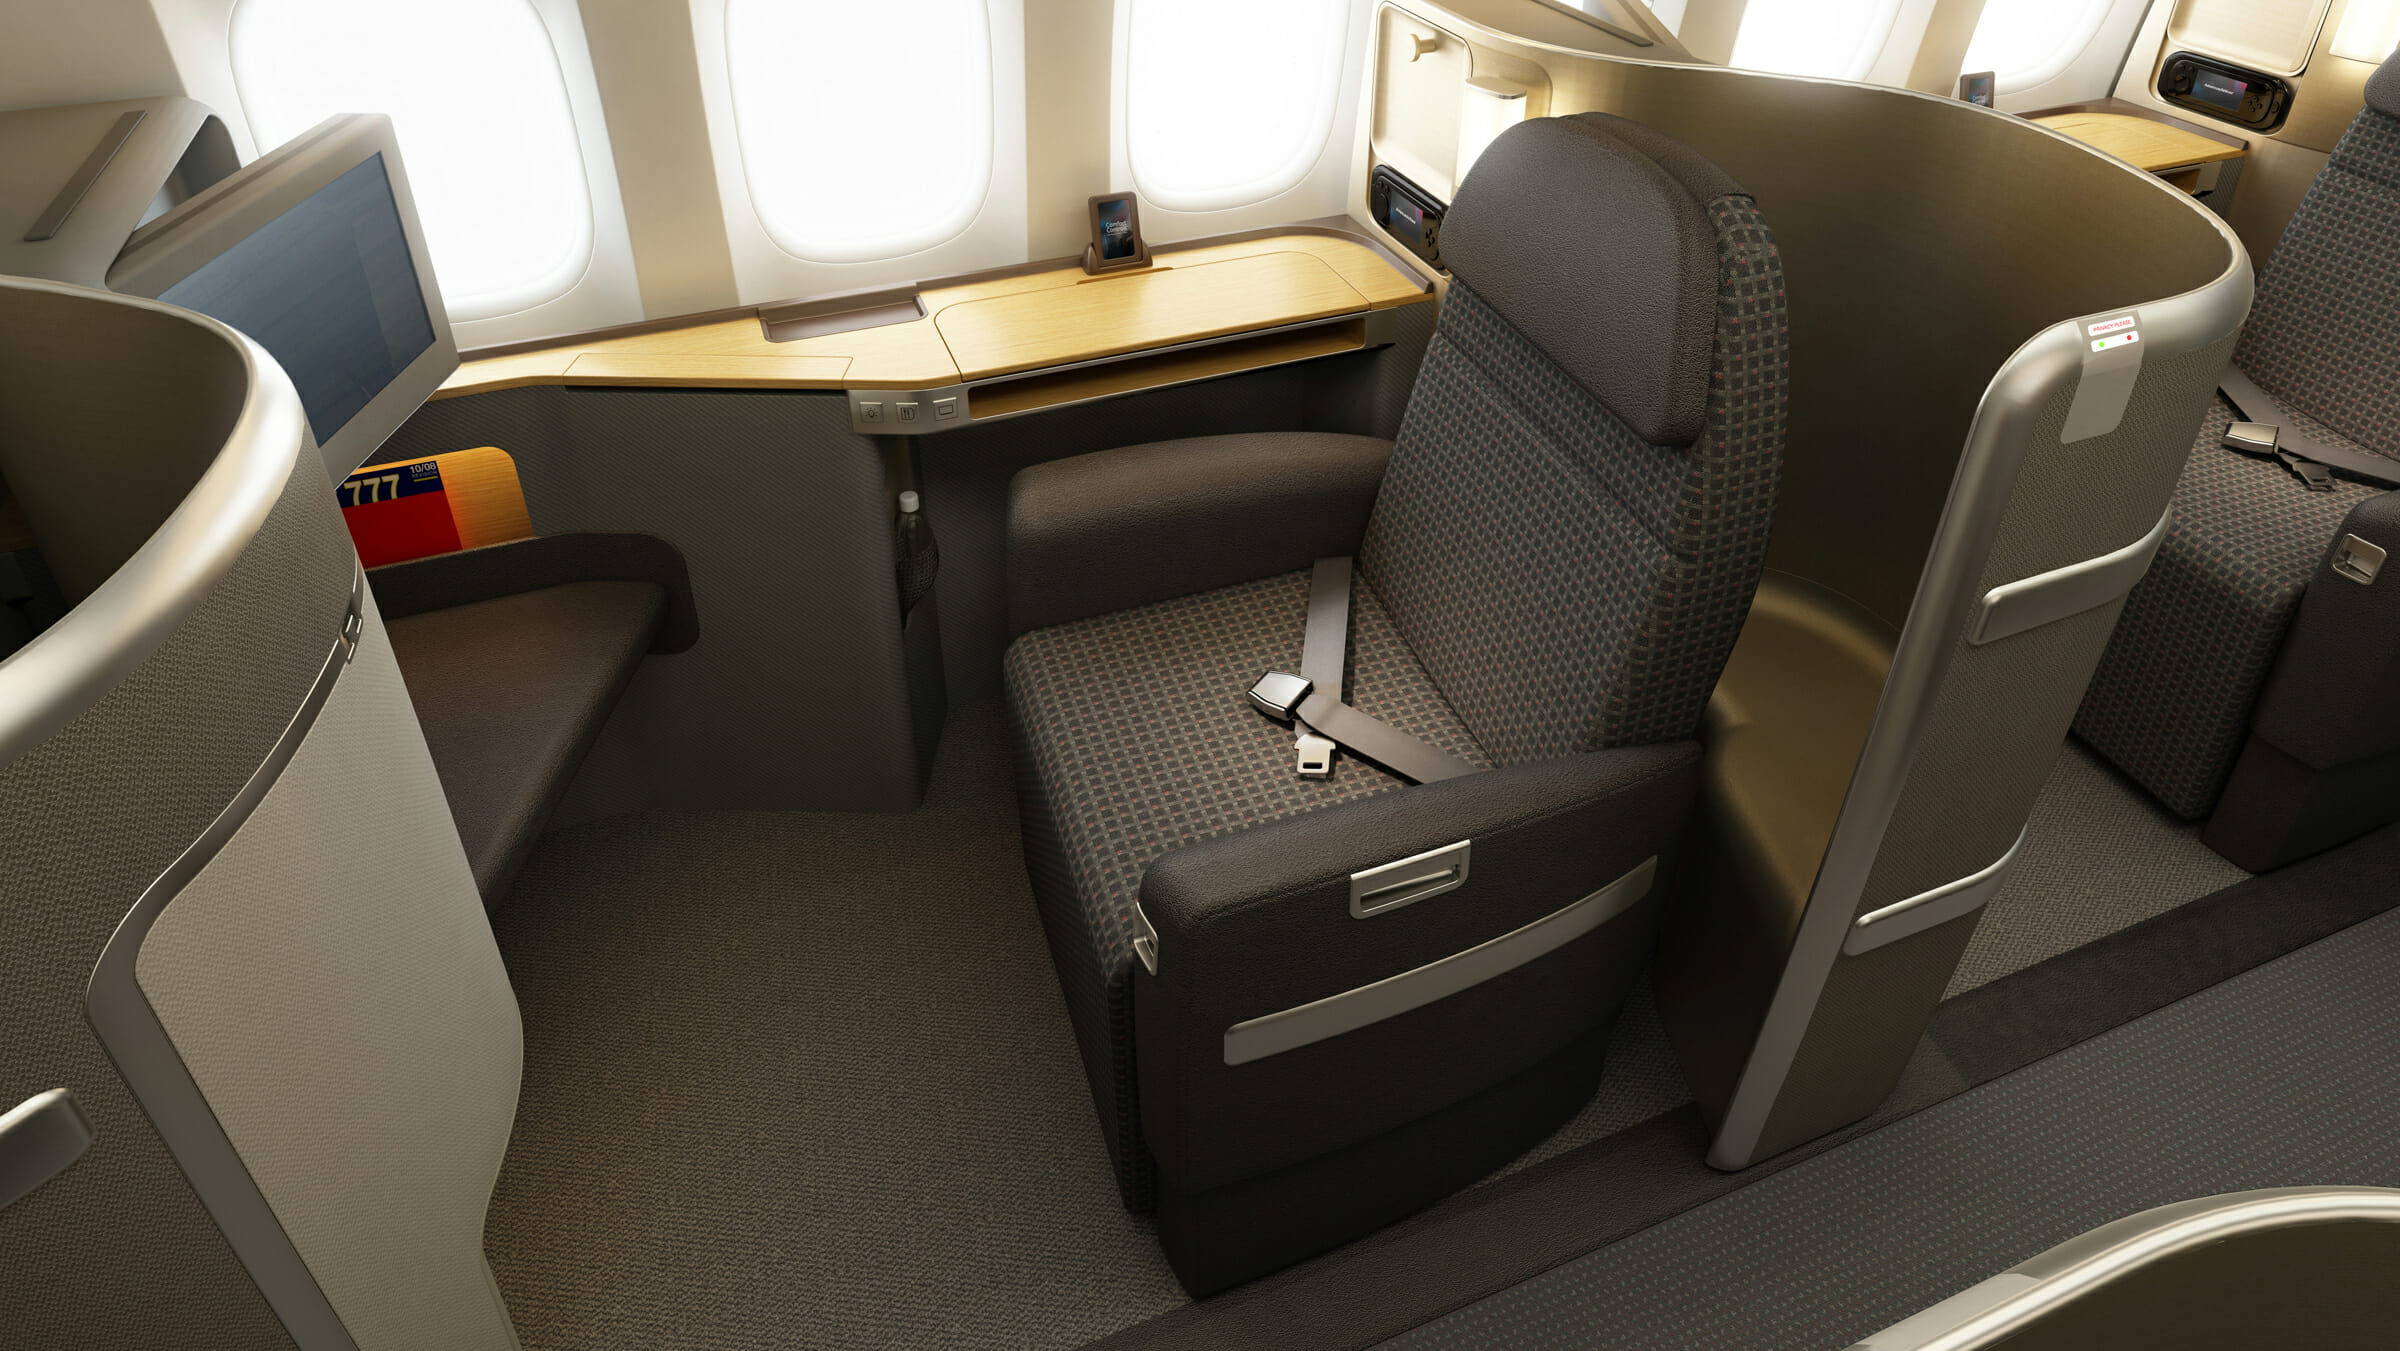 American Airlines 777-300ER First Class